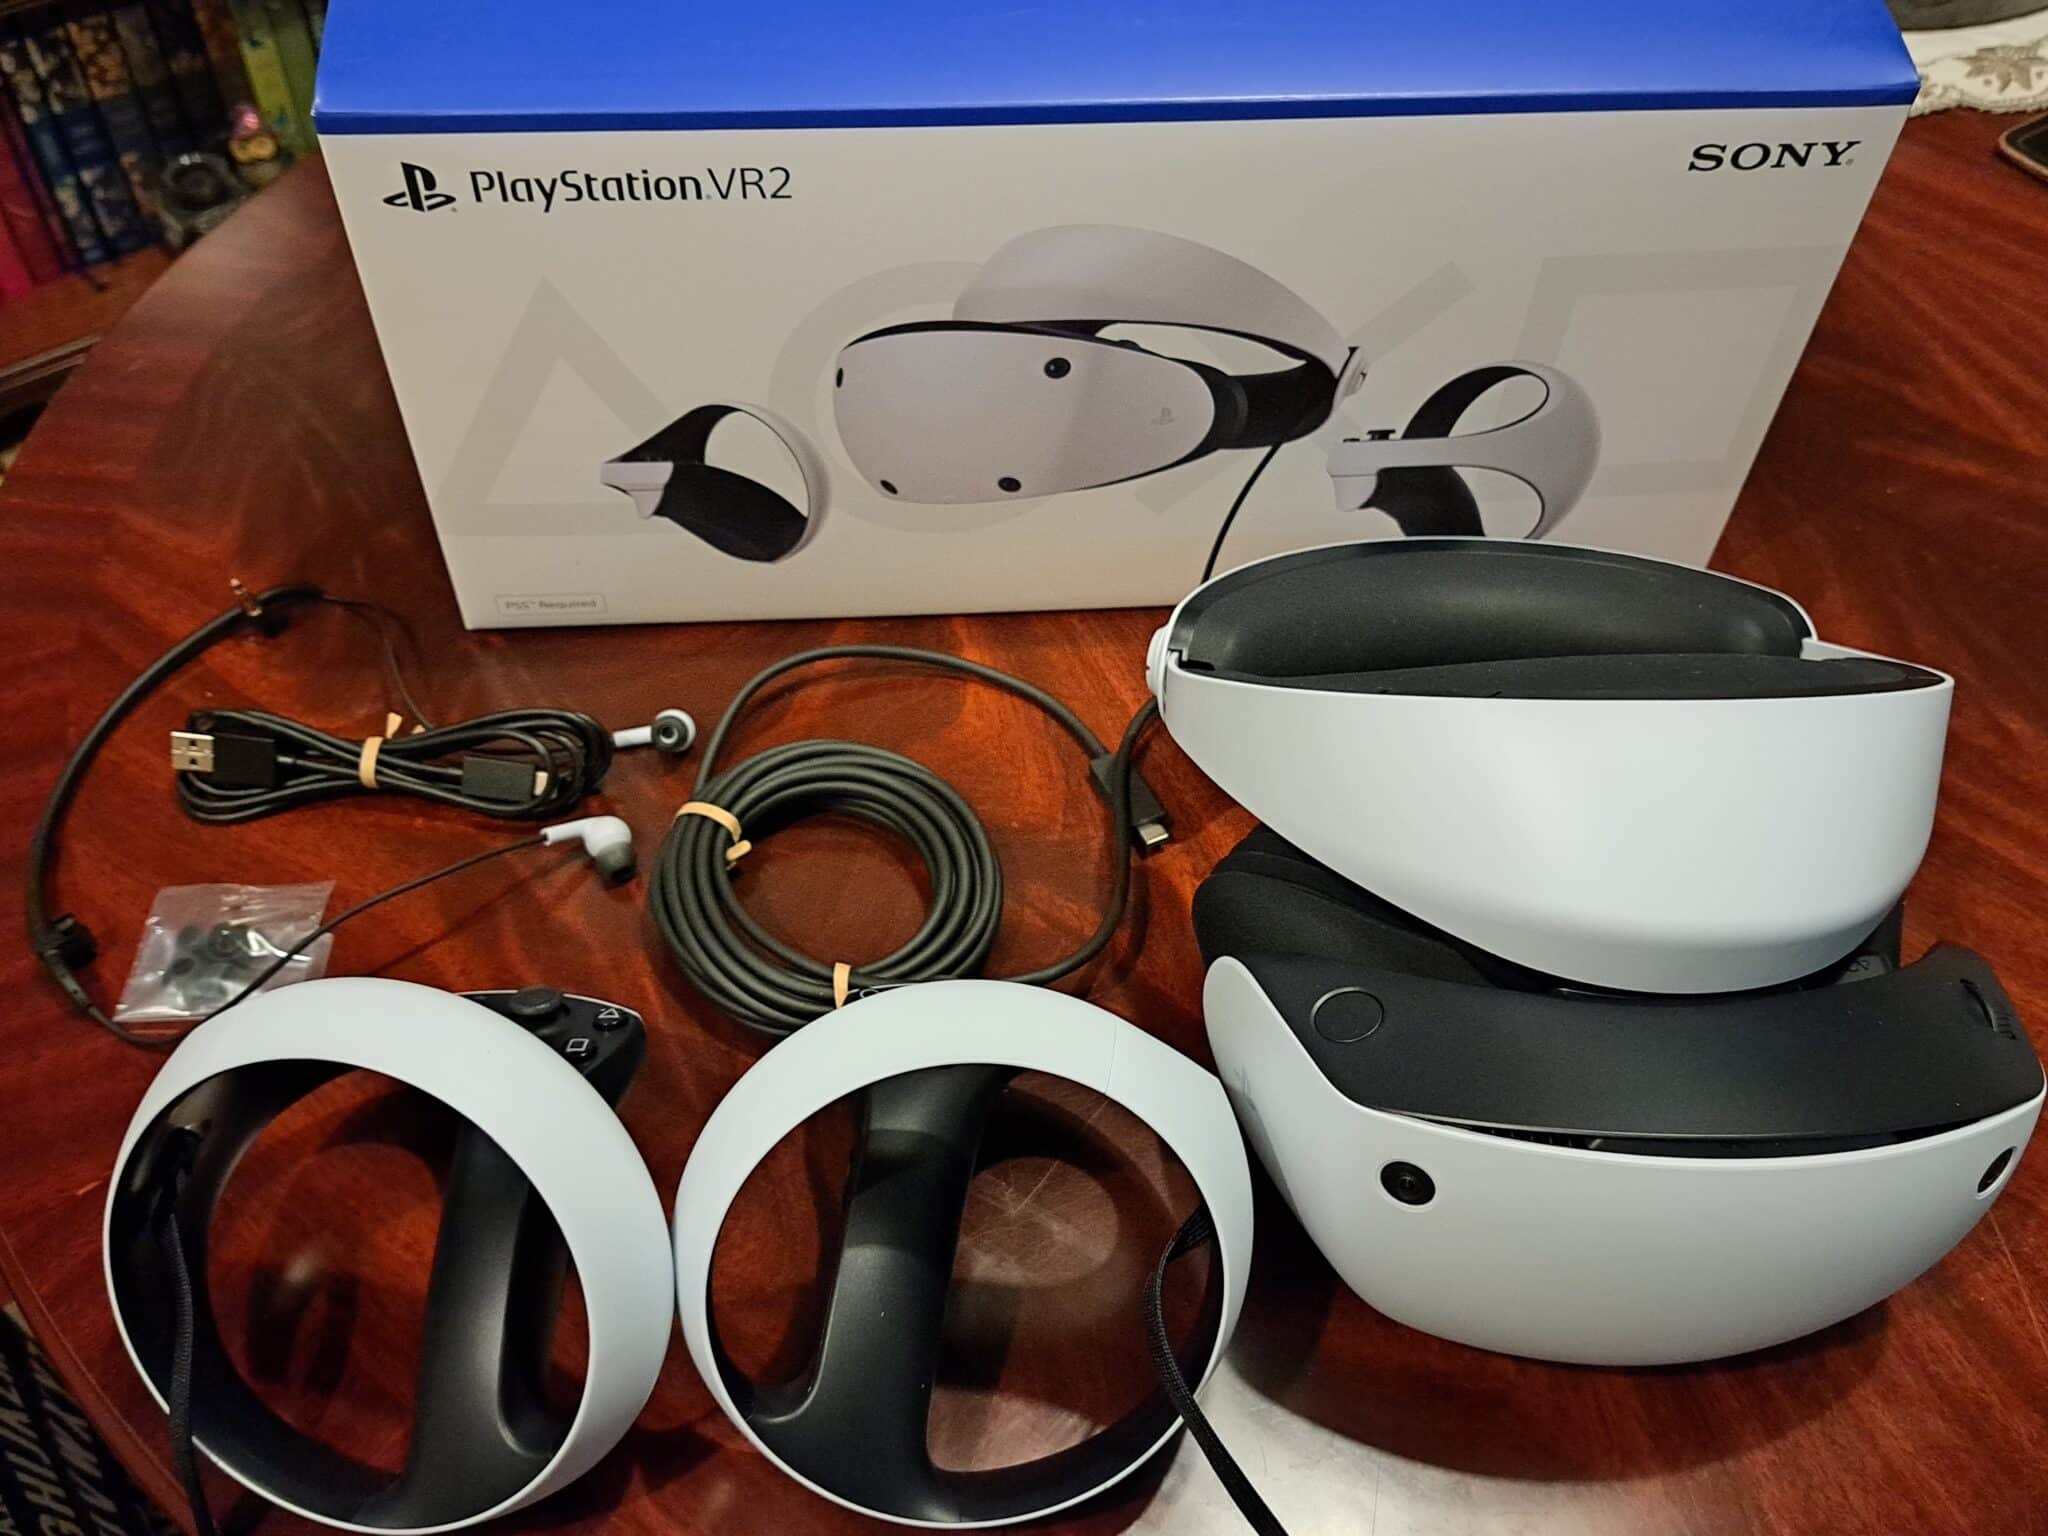 PSVR 2 - PlayStation VR2 complete set of wires and headset